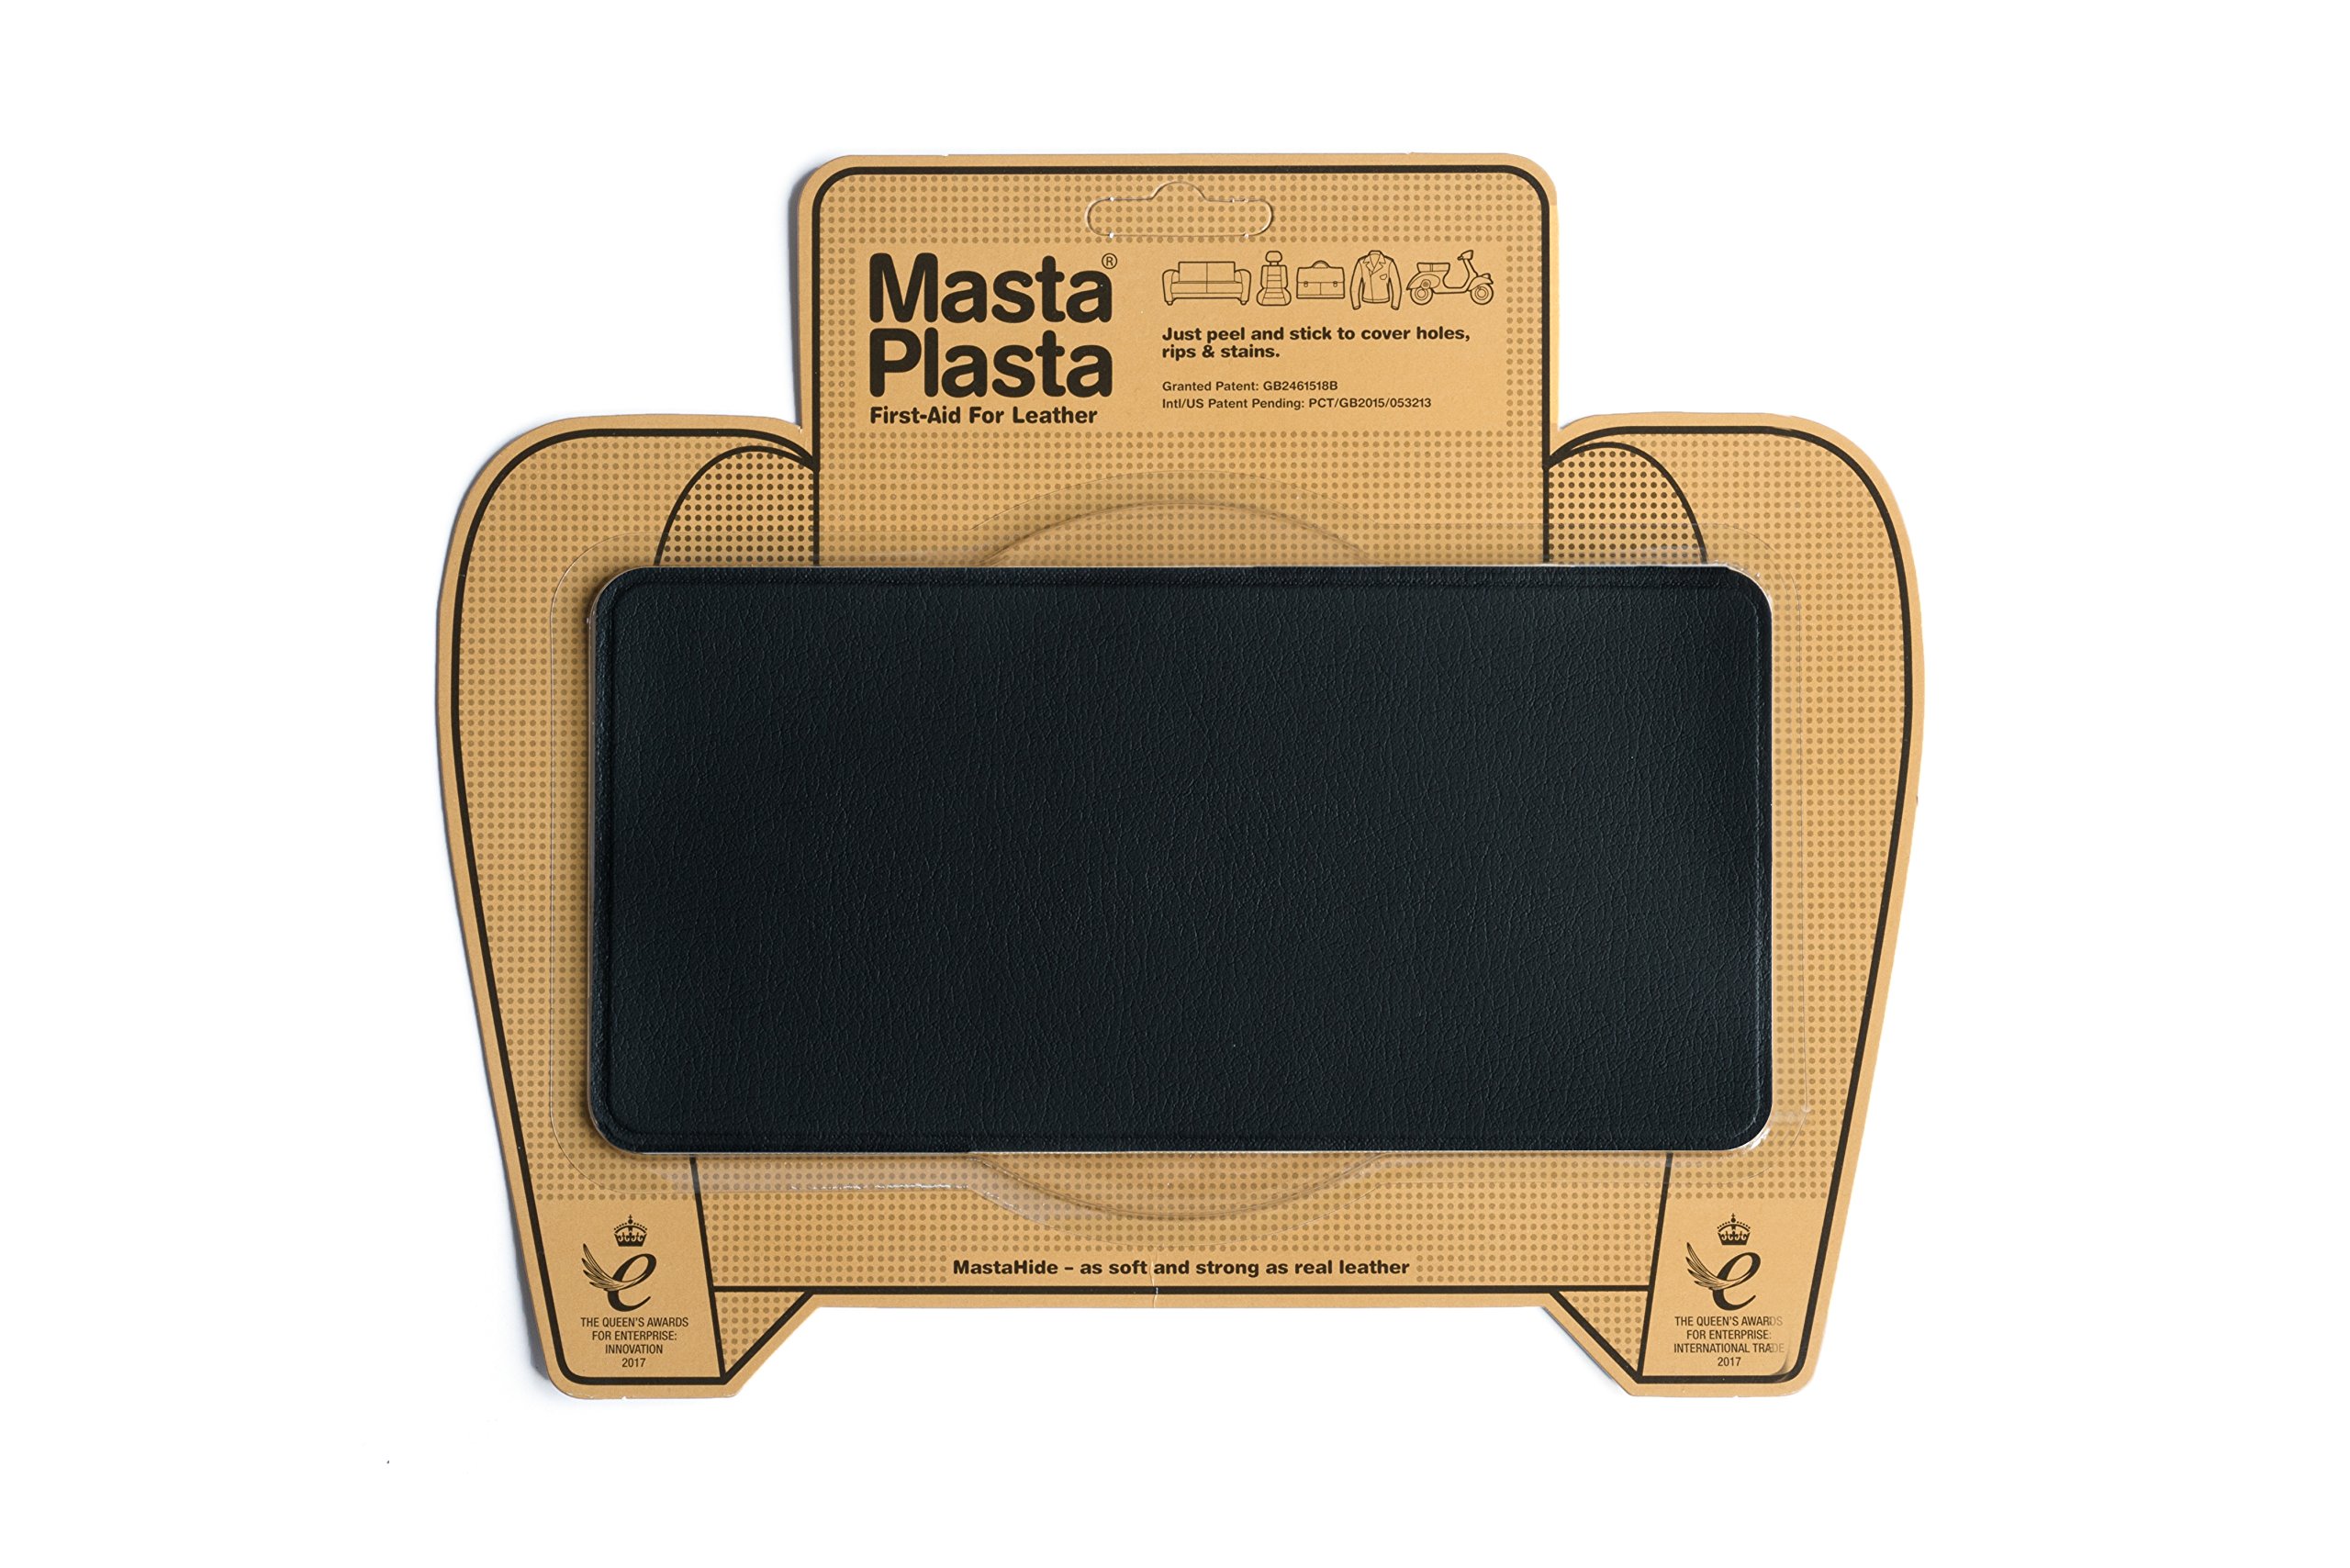 MastaPlasta Instant Self-Adhesive Premium Leather Repair Patch. Color:  Black Leather 8in x 4in /20cm x 10cm. Upholstery Quality Adhesive Patch for  Sofas, Car Interiors, Bags & More 8in x 4in A Black